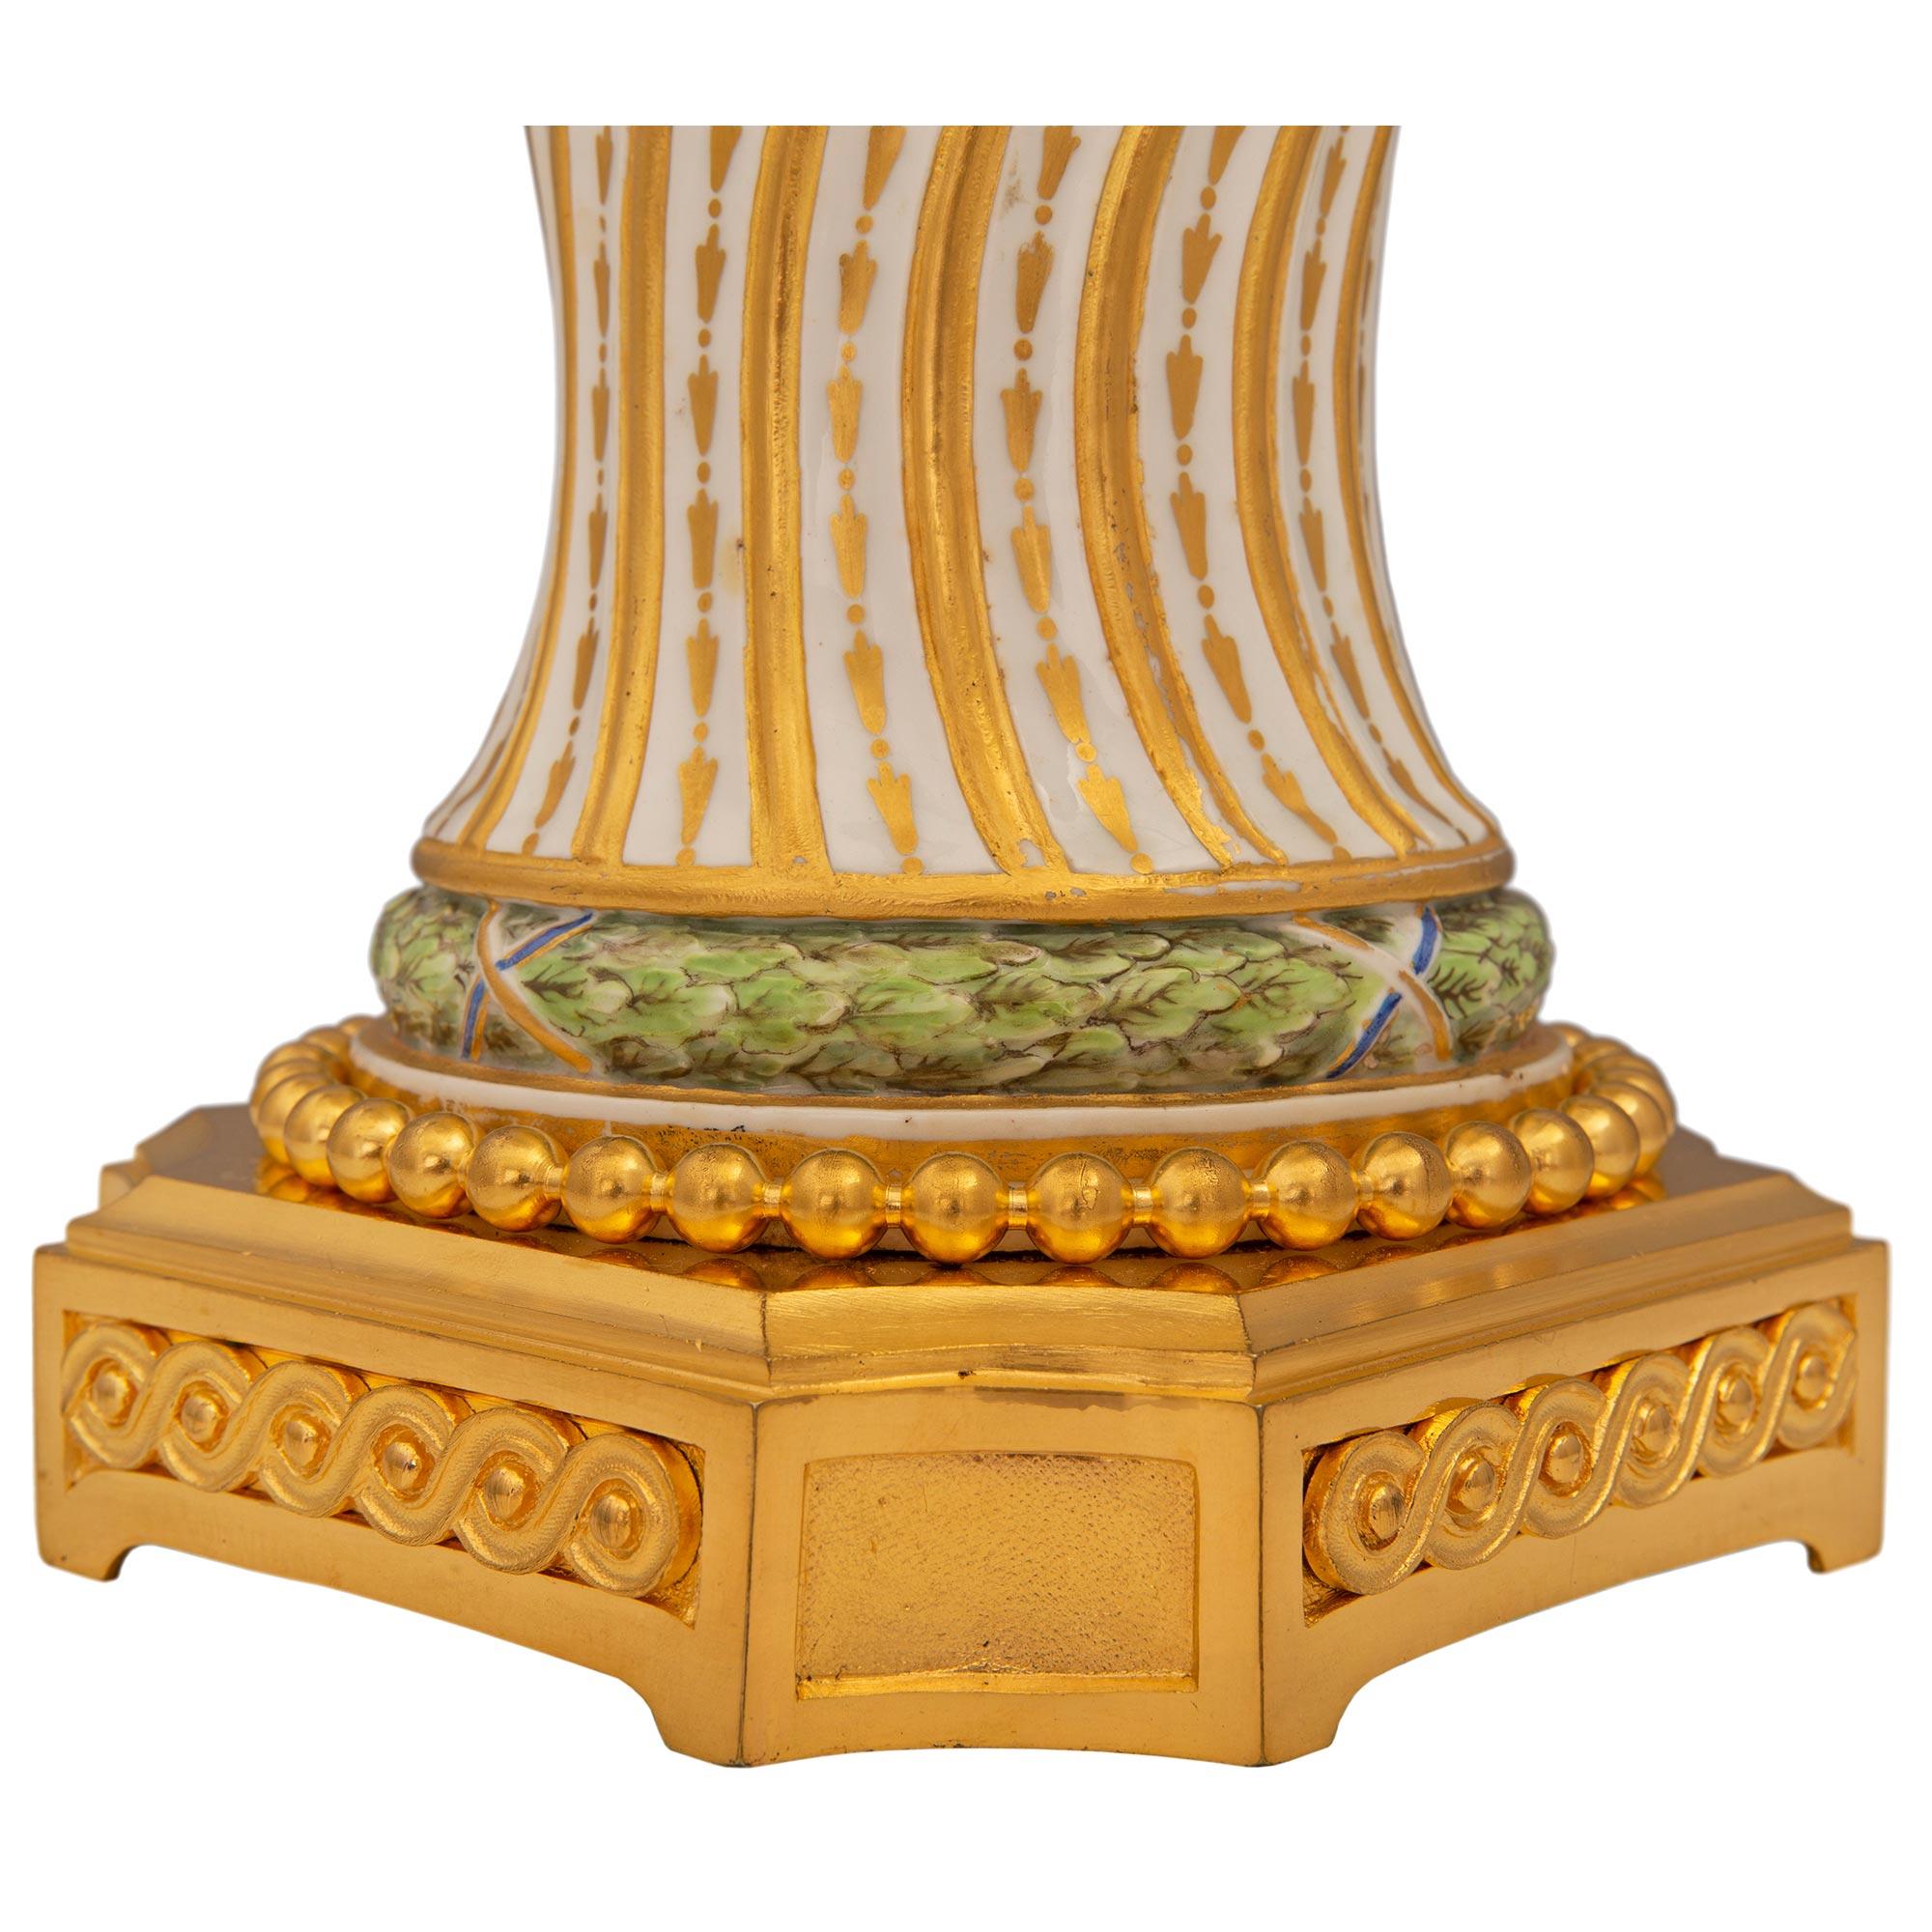 Pair of French 19th Century Louis XVI St. Sèvres Porcelain & Ormolu Lidded Urns For Sale 10